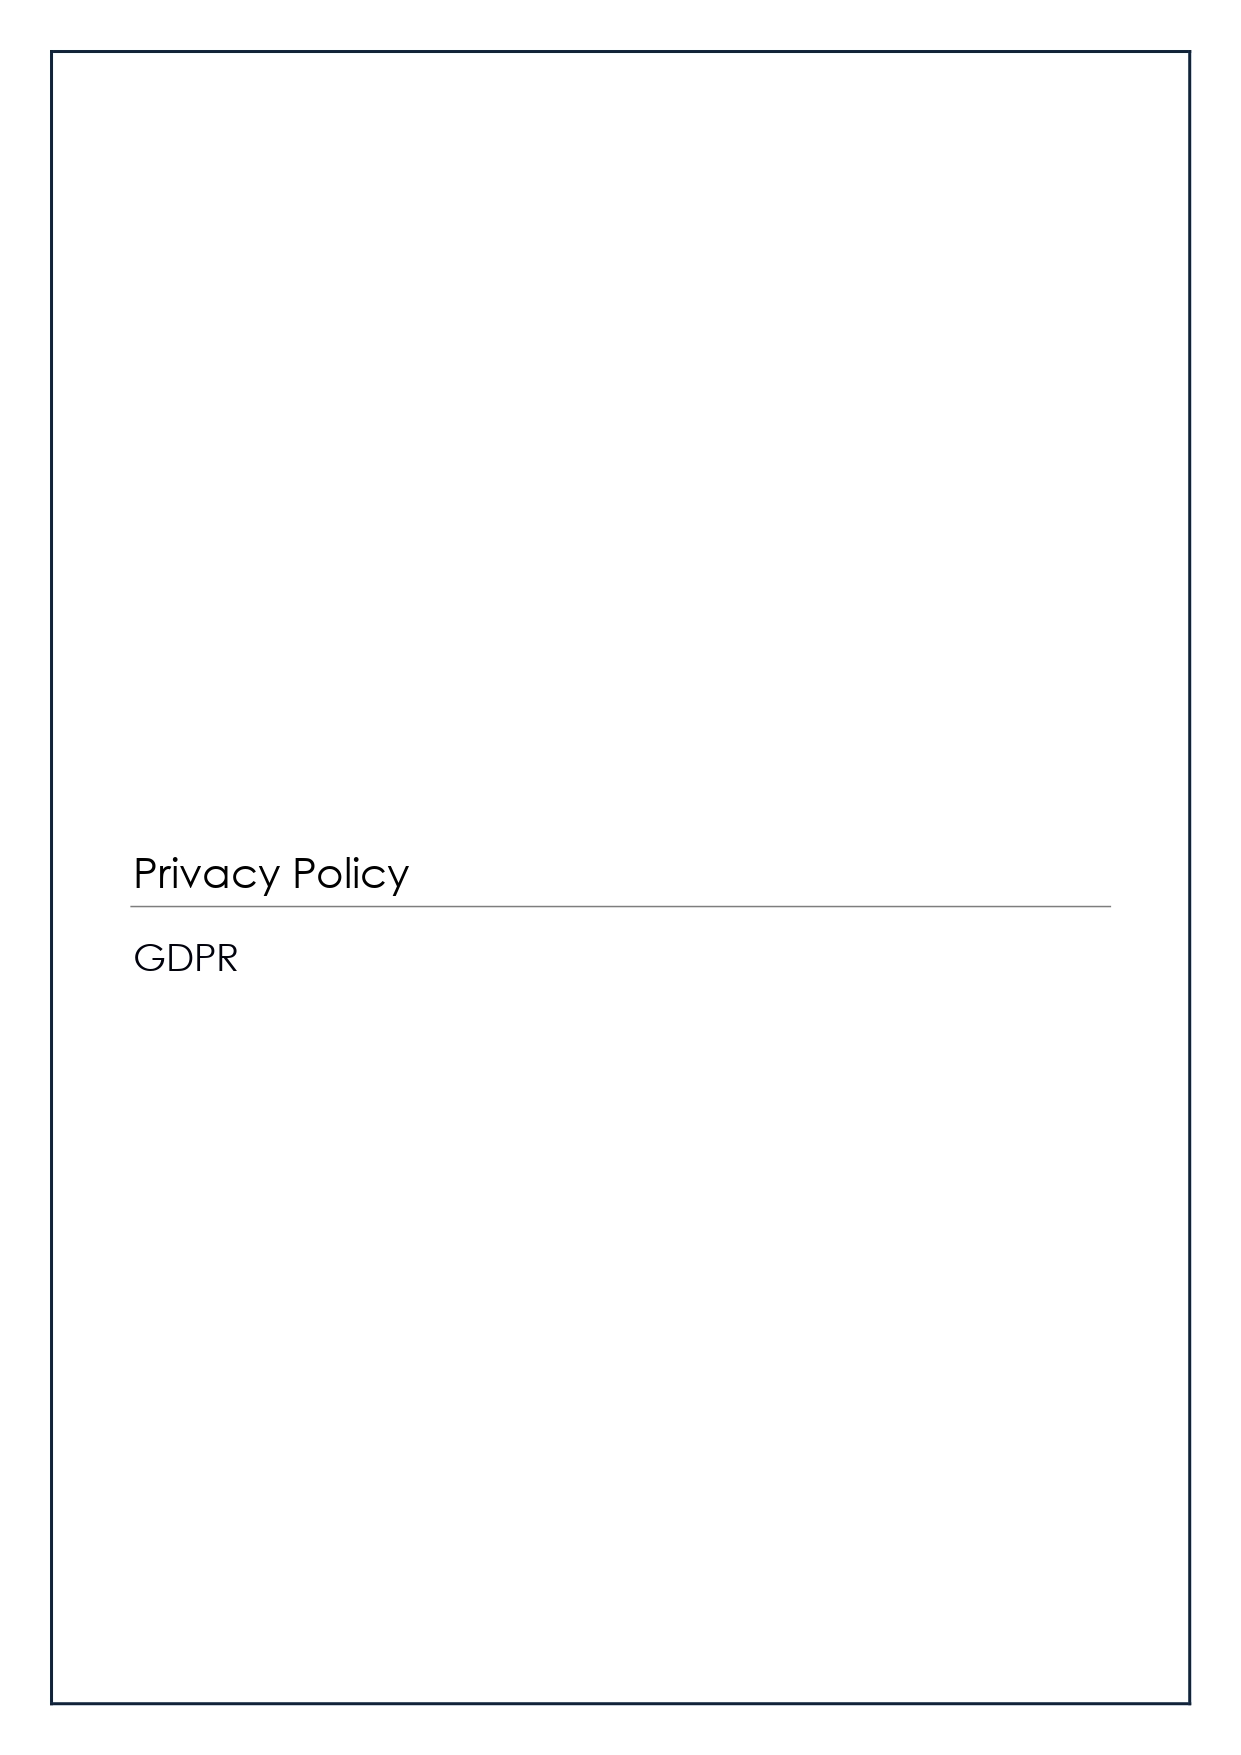 02 Privacy Policy textup.be NL V1.0 page 0001